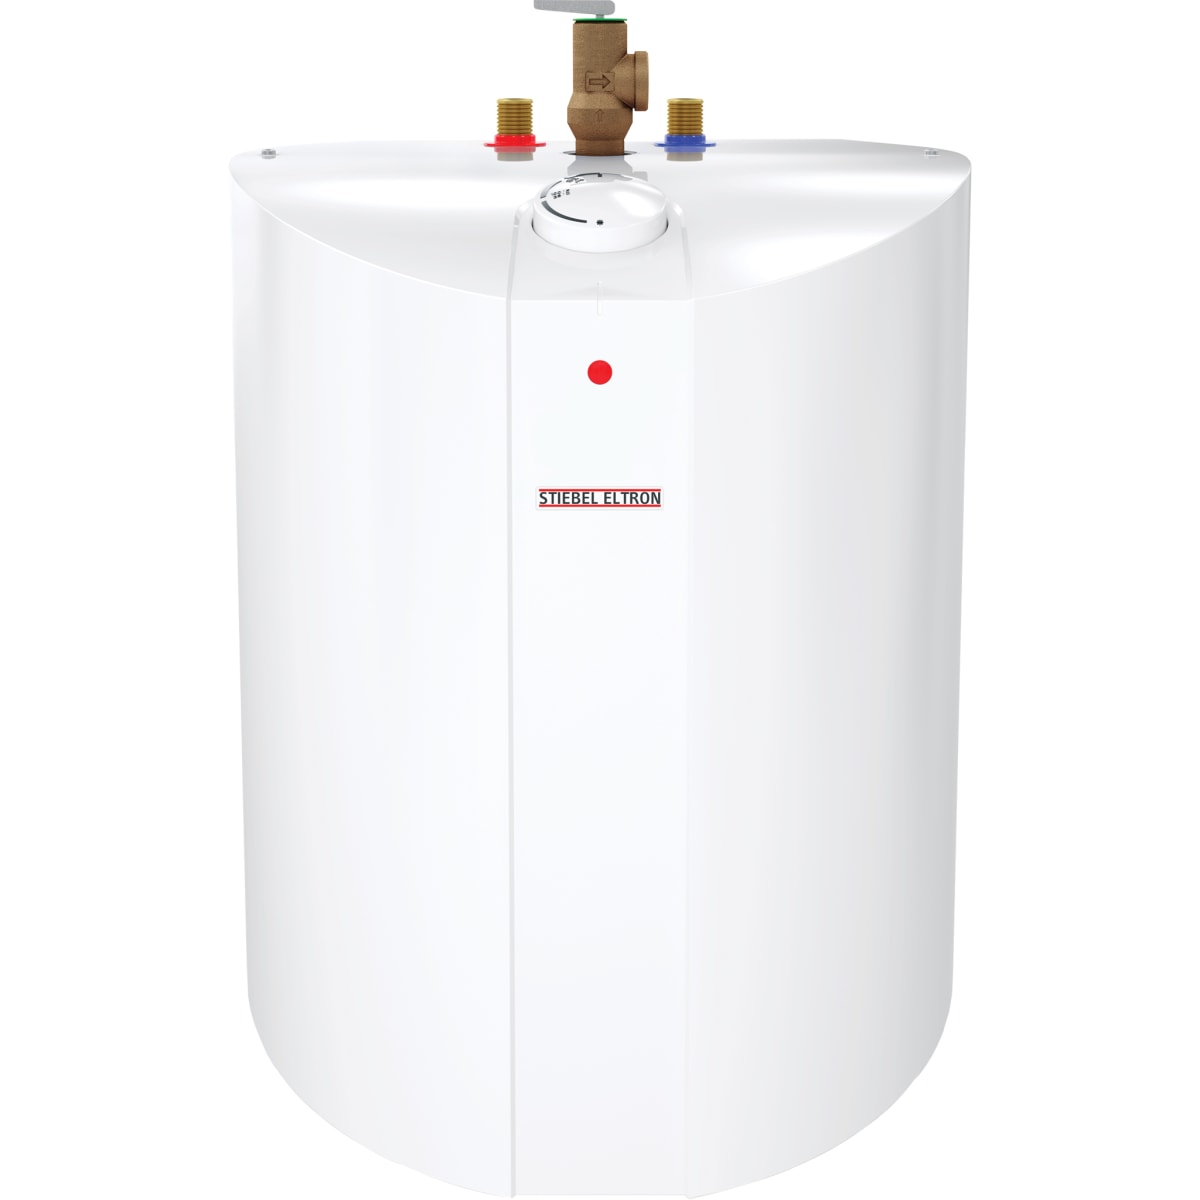 Bosch 2.5 Gal. Electric Point-of-Use Water Heater ES 2.5 - The